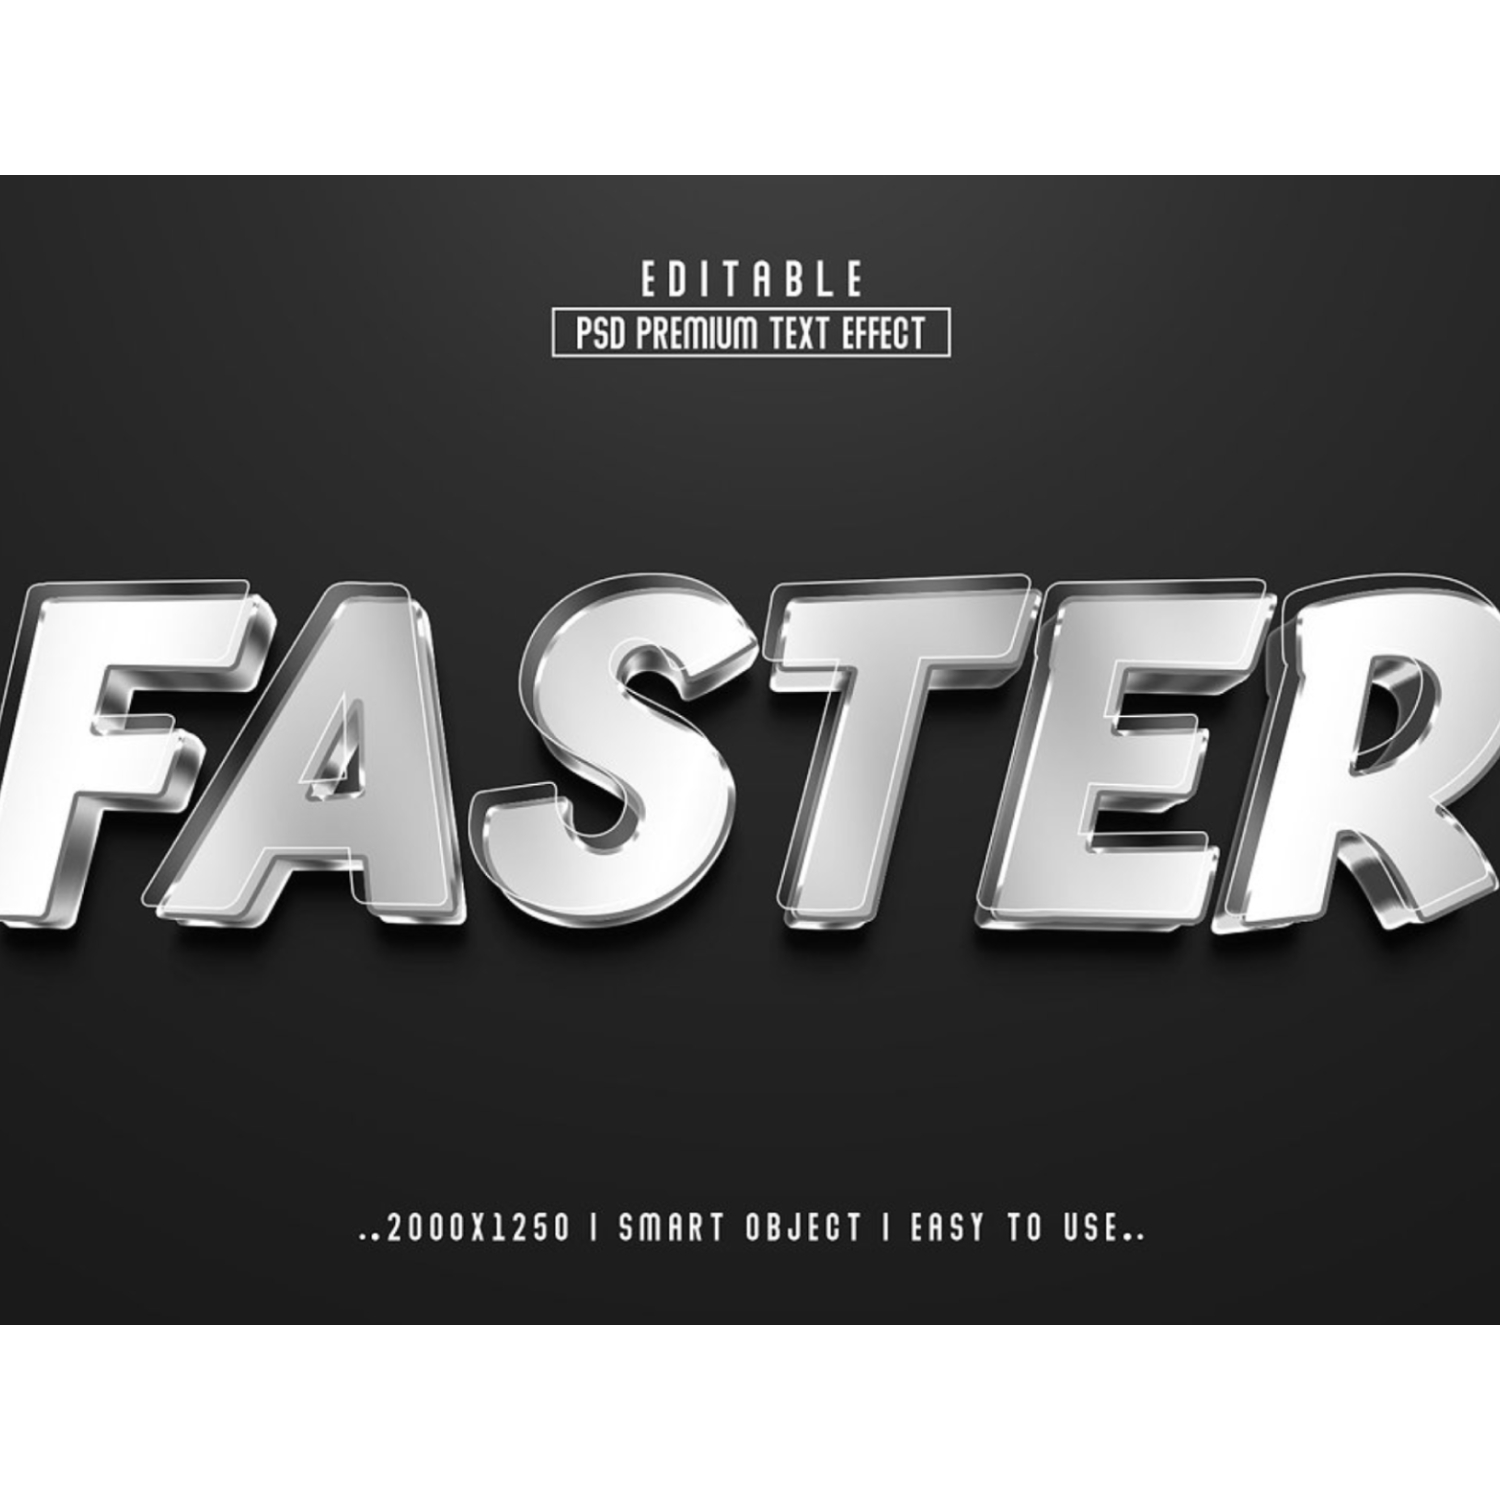 3d text effect that looks like the word faster.